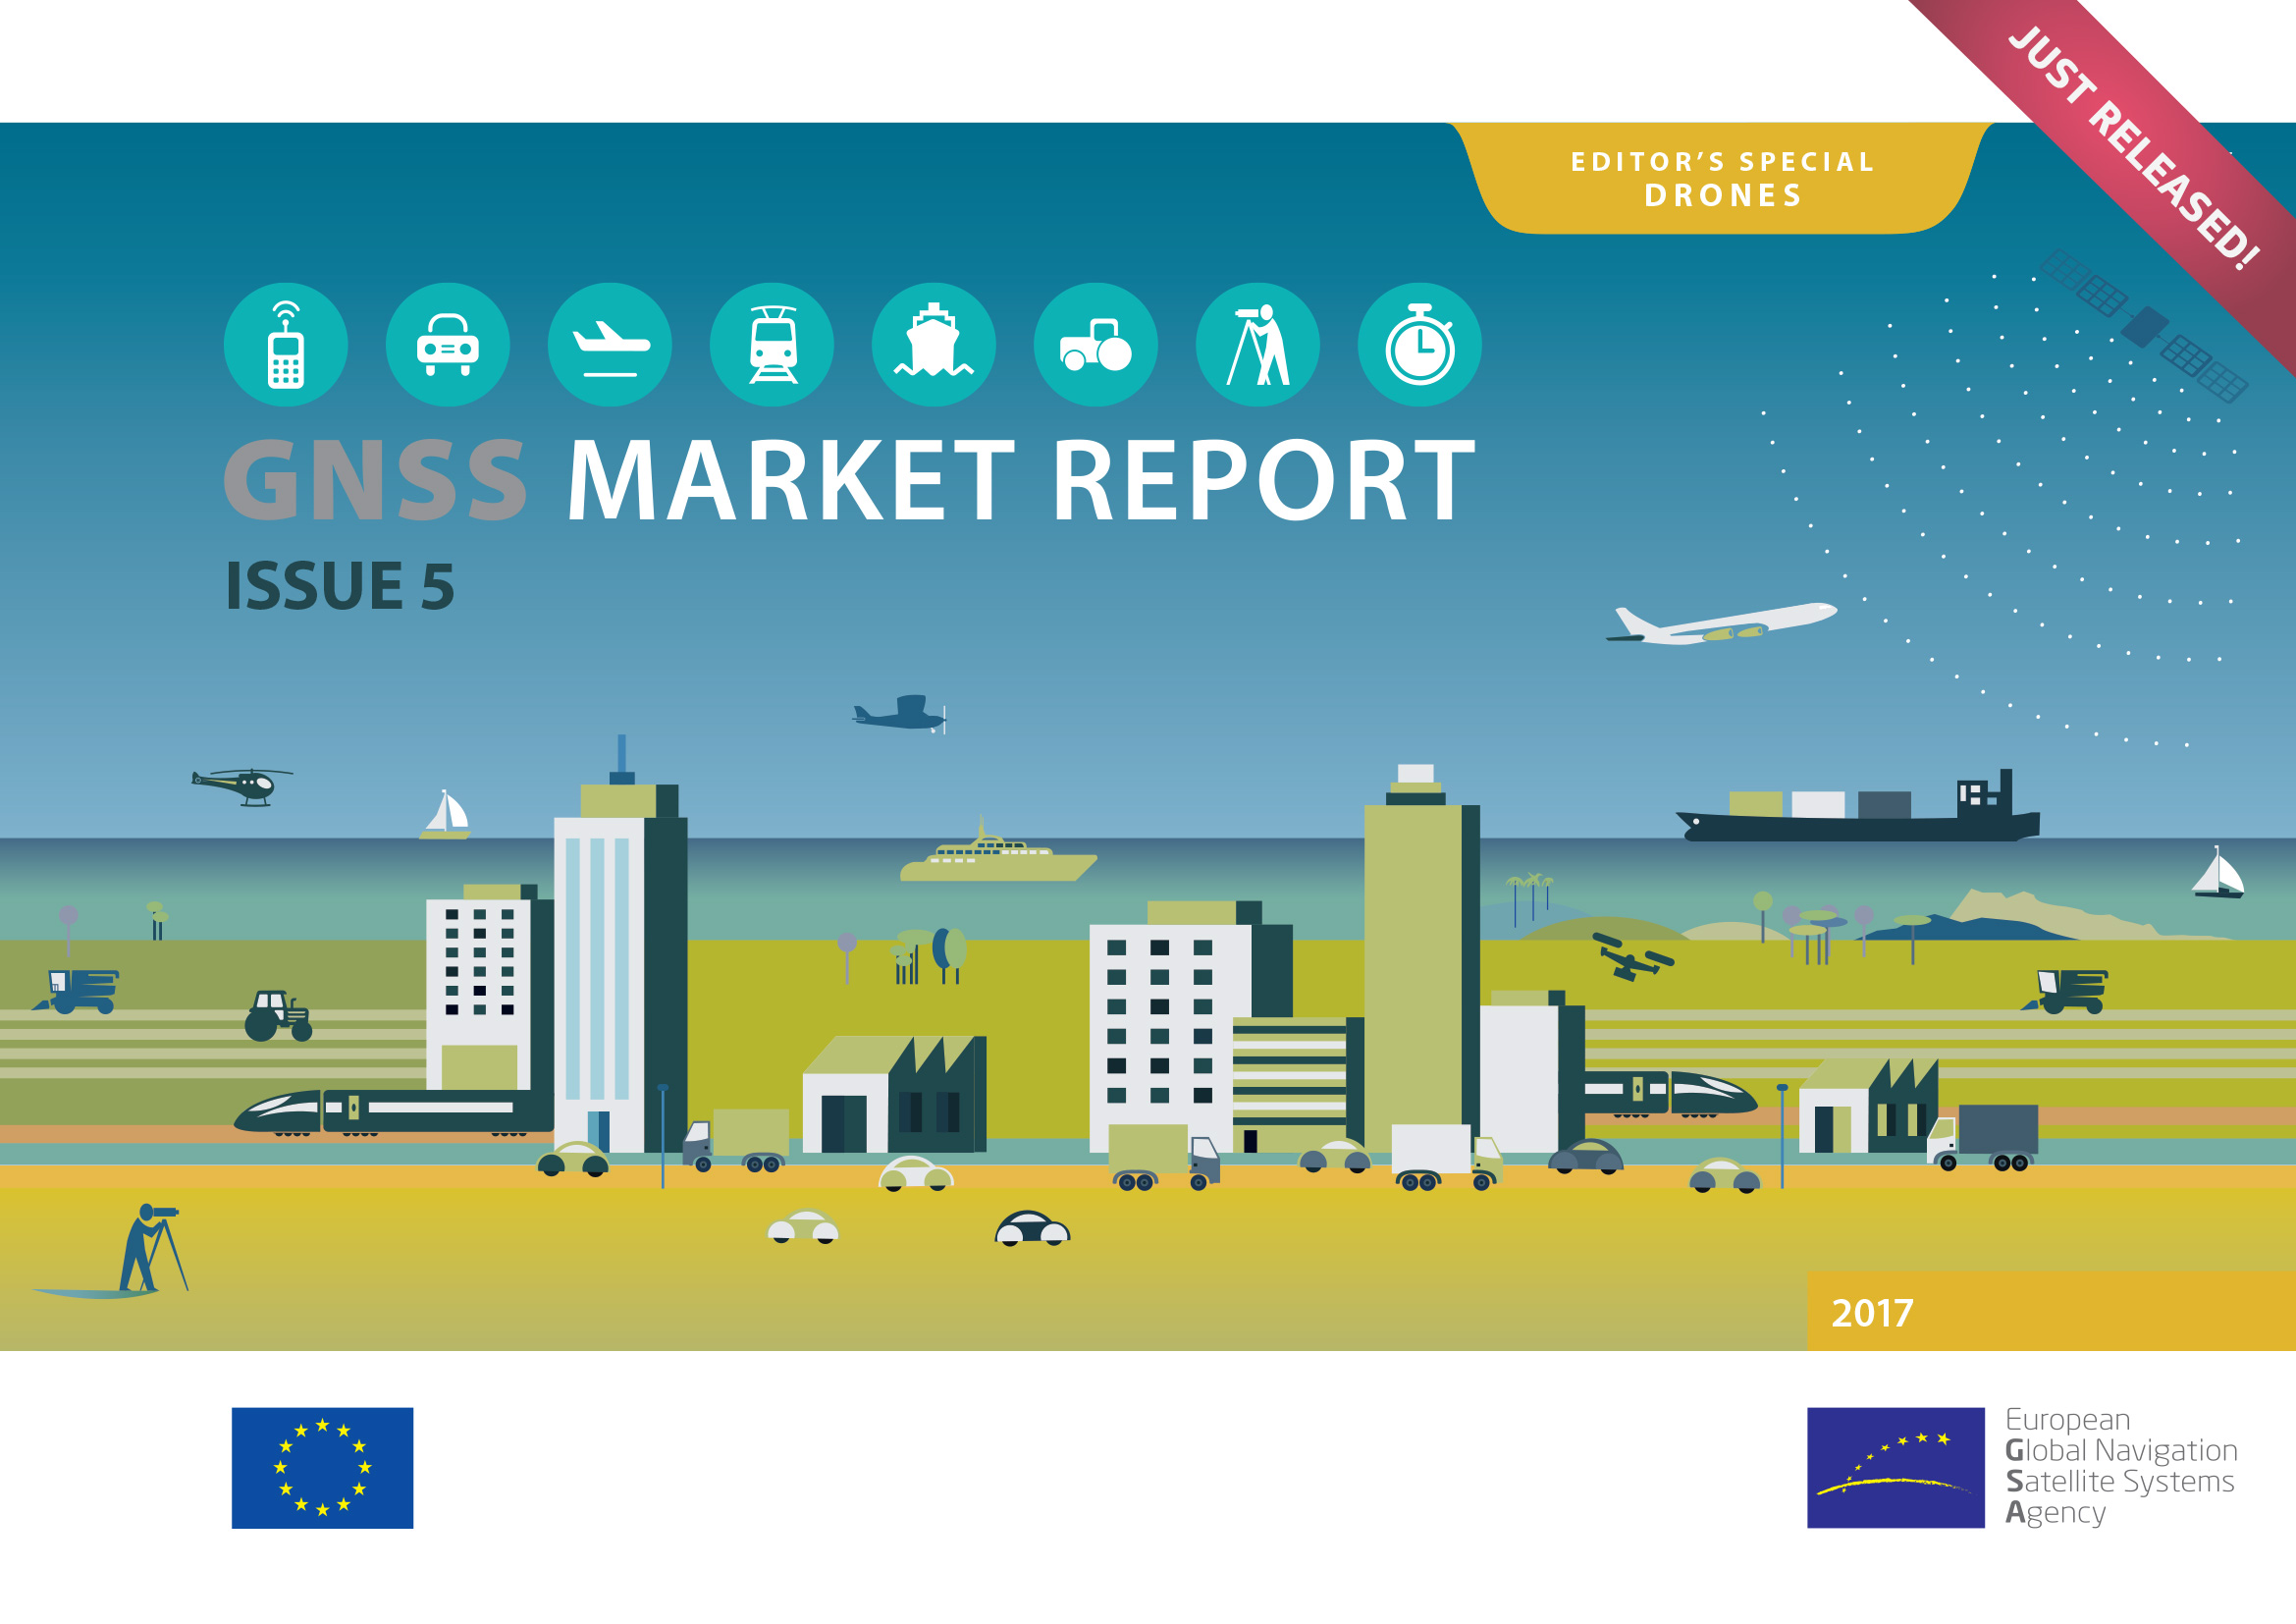 GNSS Market Report 2017 - just released.